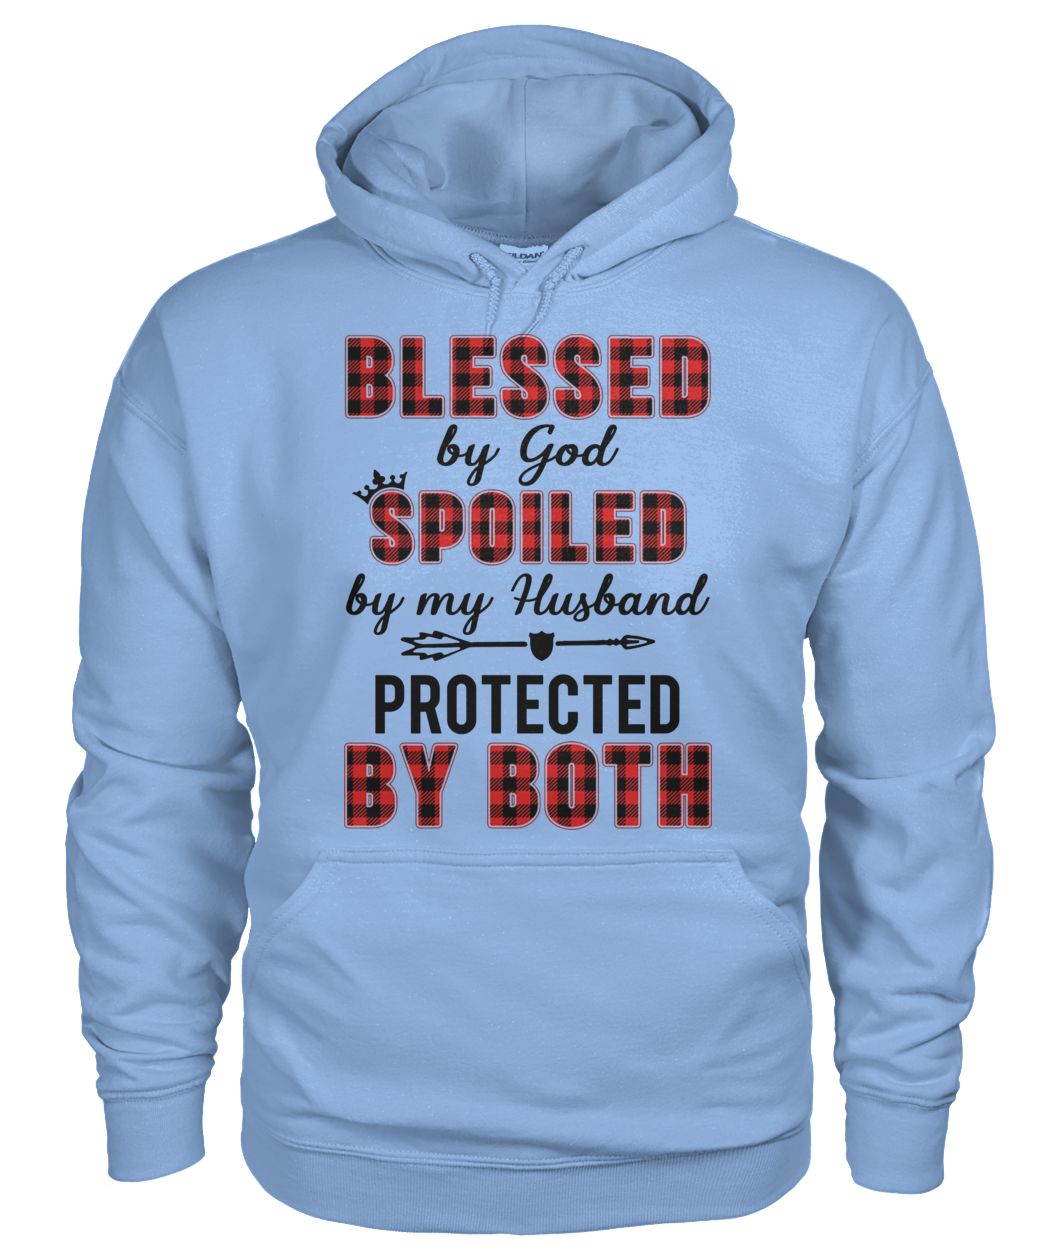 Blessed by god spoiled by my husband protected by both gildan hoodie